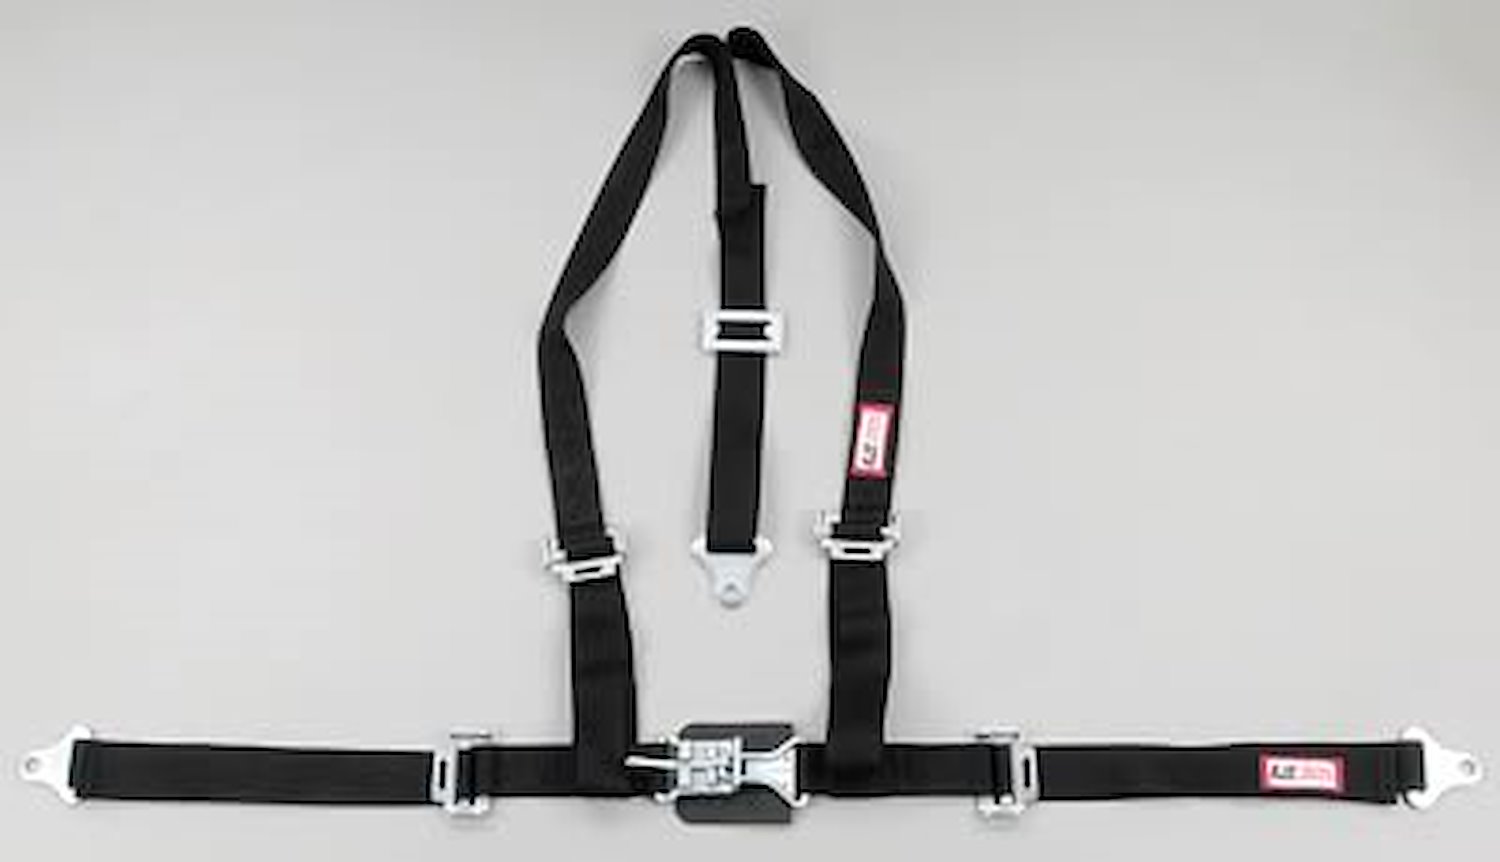 NON-SFI L&L HARNESS 2 PULL DOWN Lap Belt w/Adjuster 2 S.H. Individual FLOOR MOUNT w/STERNUM STRAP ALL WRAP ENDS BLUE